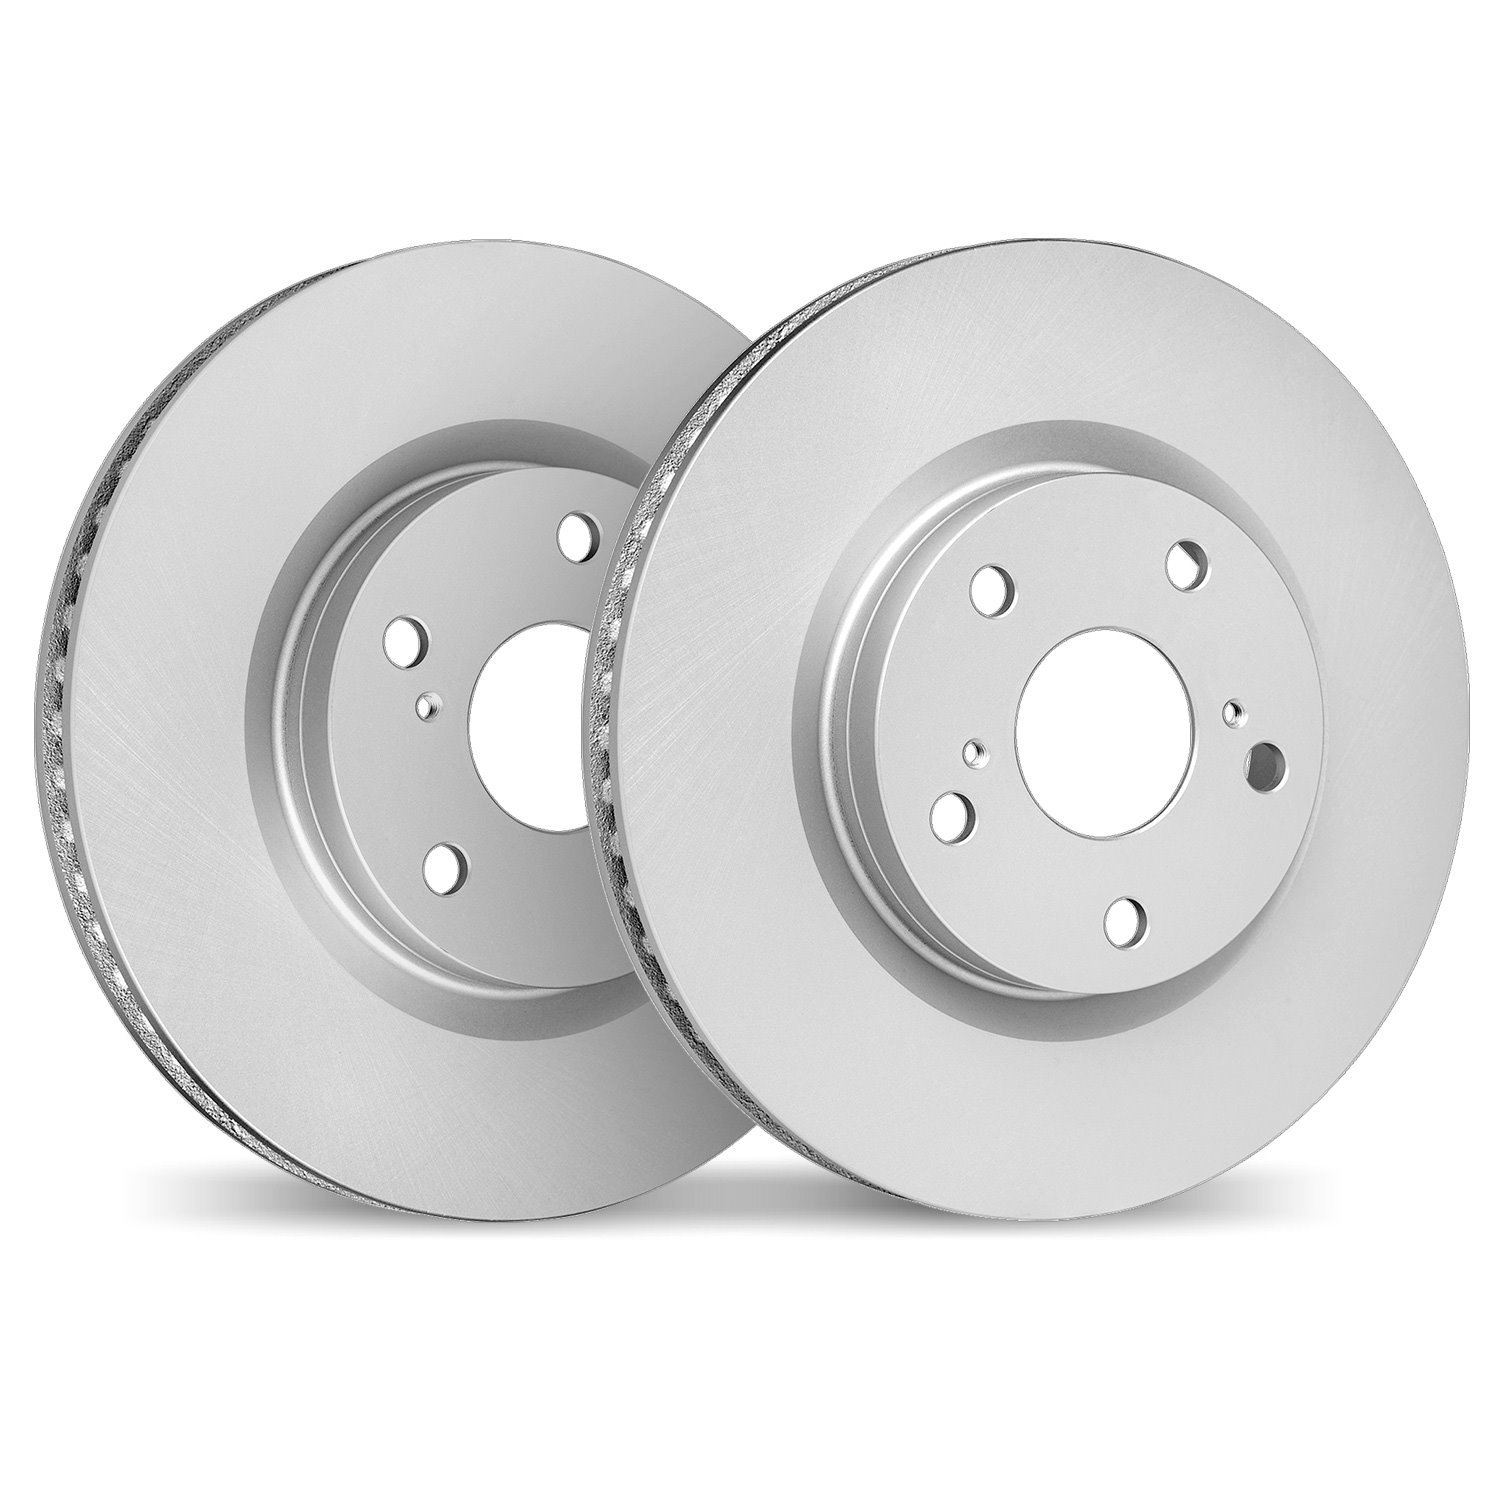 4002-80044 Geospec Brake Rotors, Fits Select Ford/Lincoln/Mercury/Mazda, Position: Front